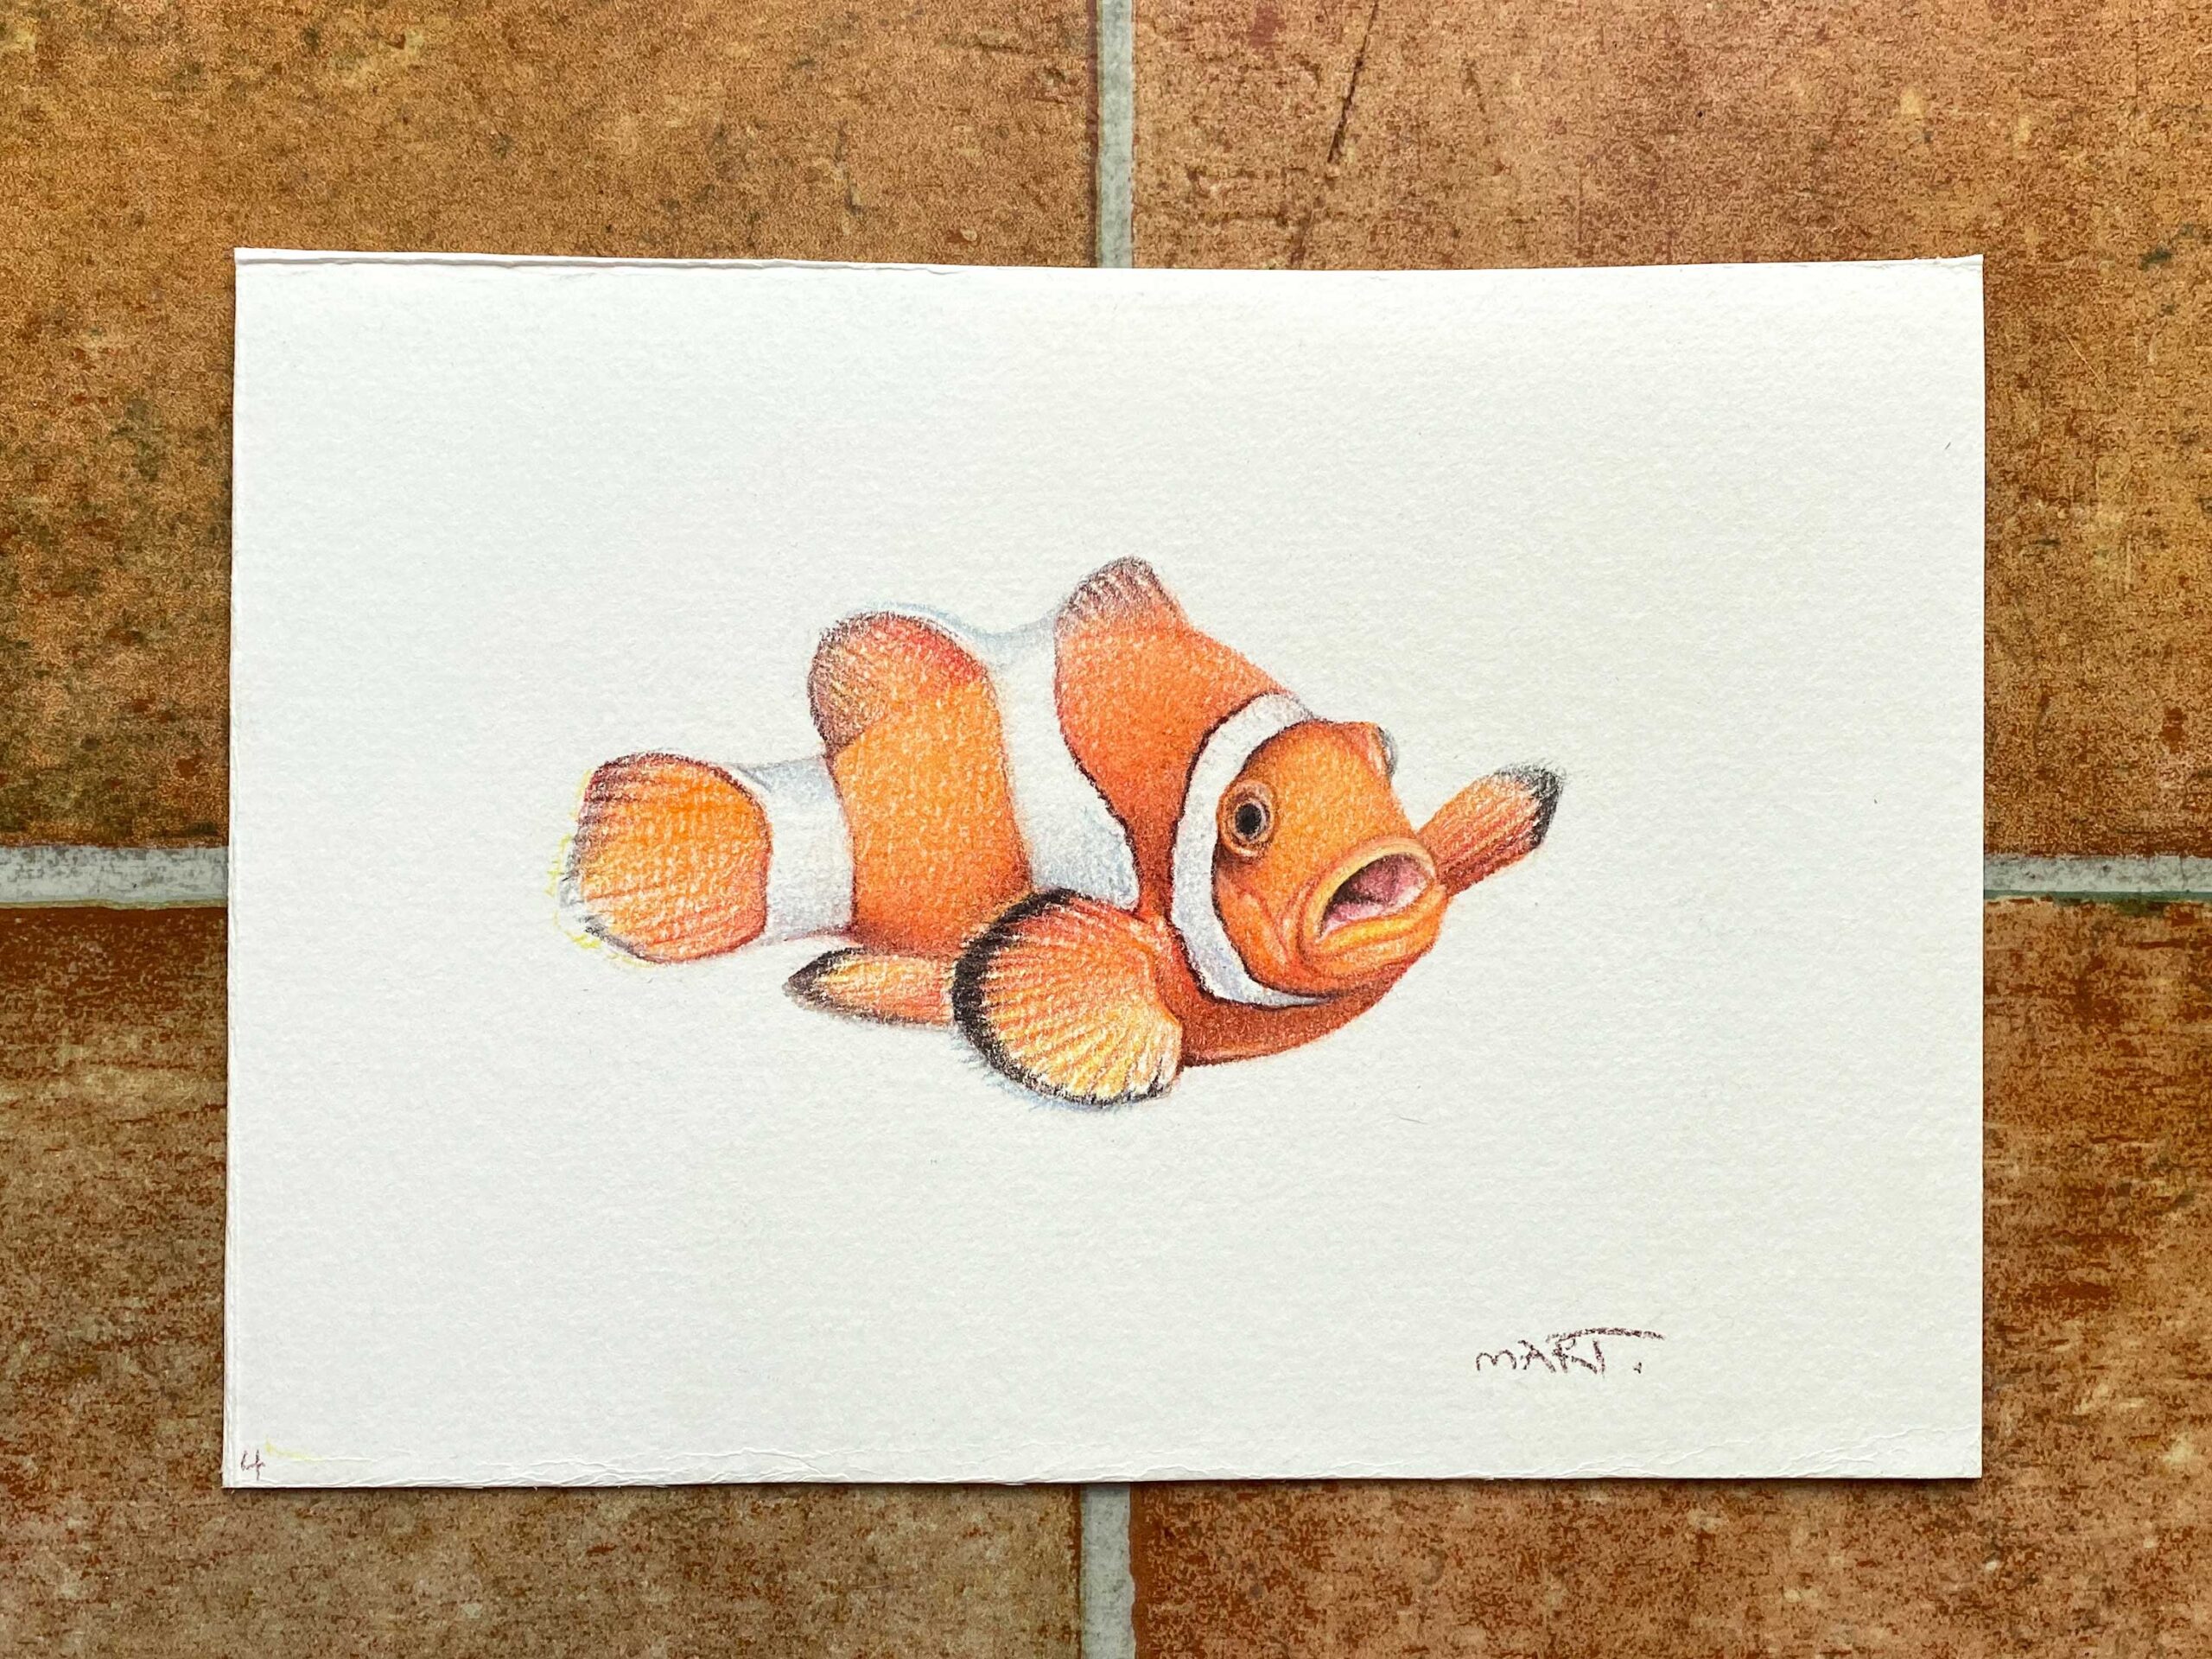 Buy this Clown Fish by Martin Aveling in aid of conservation